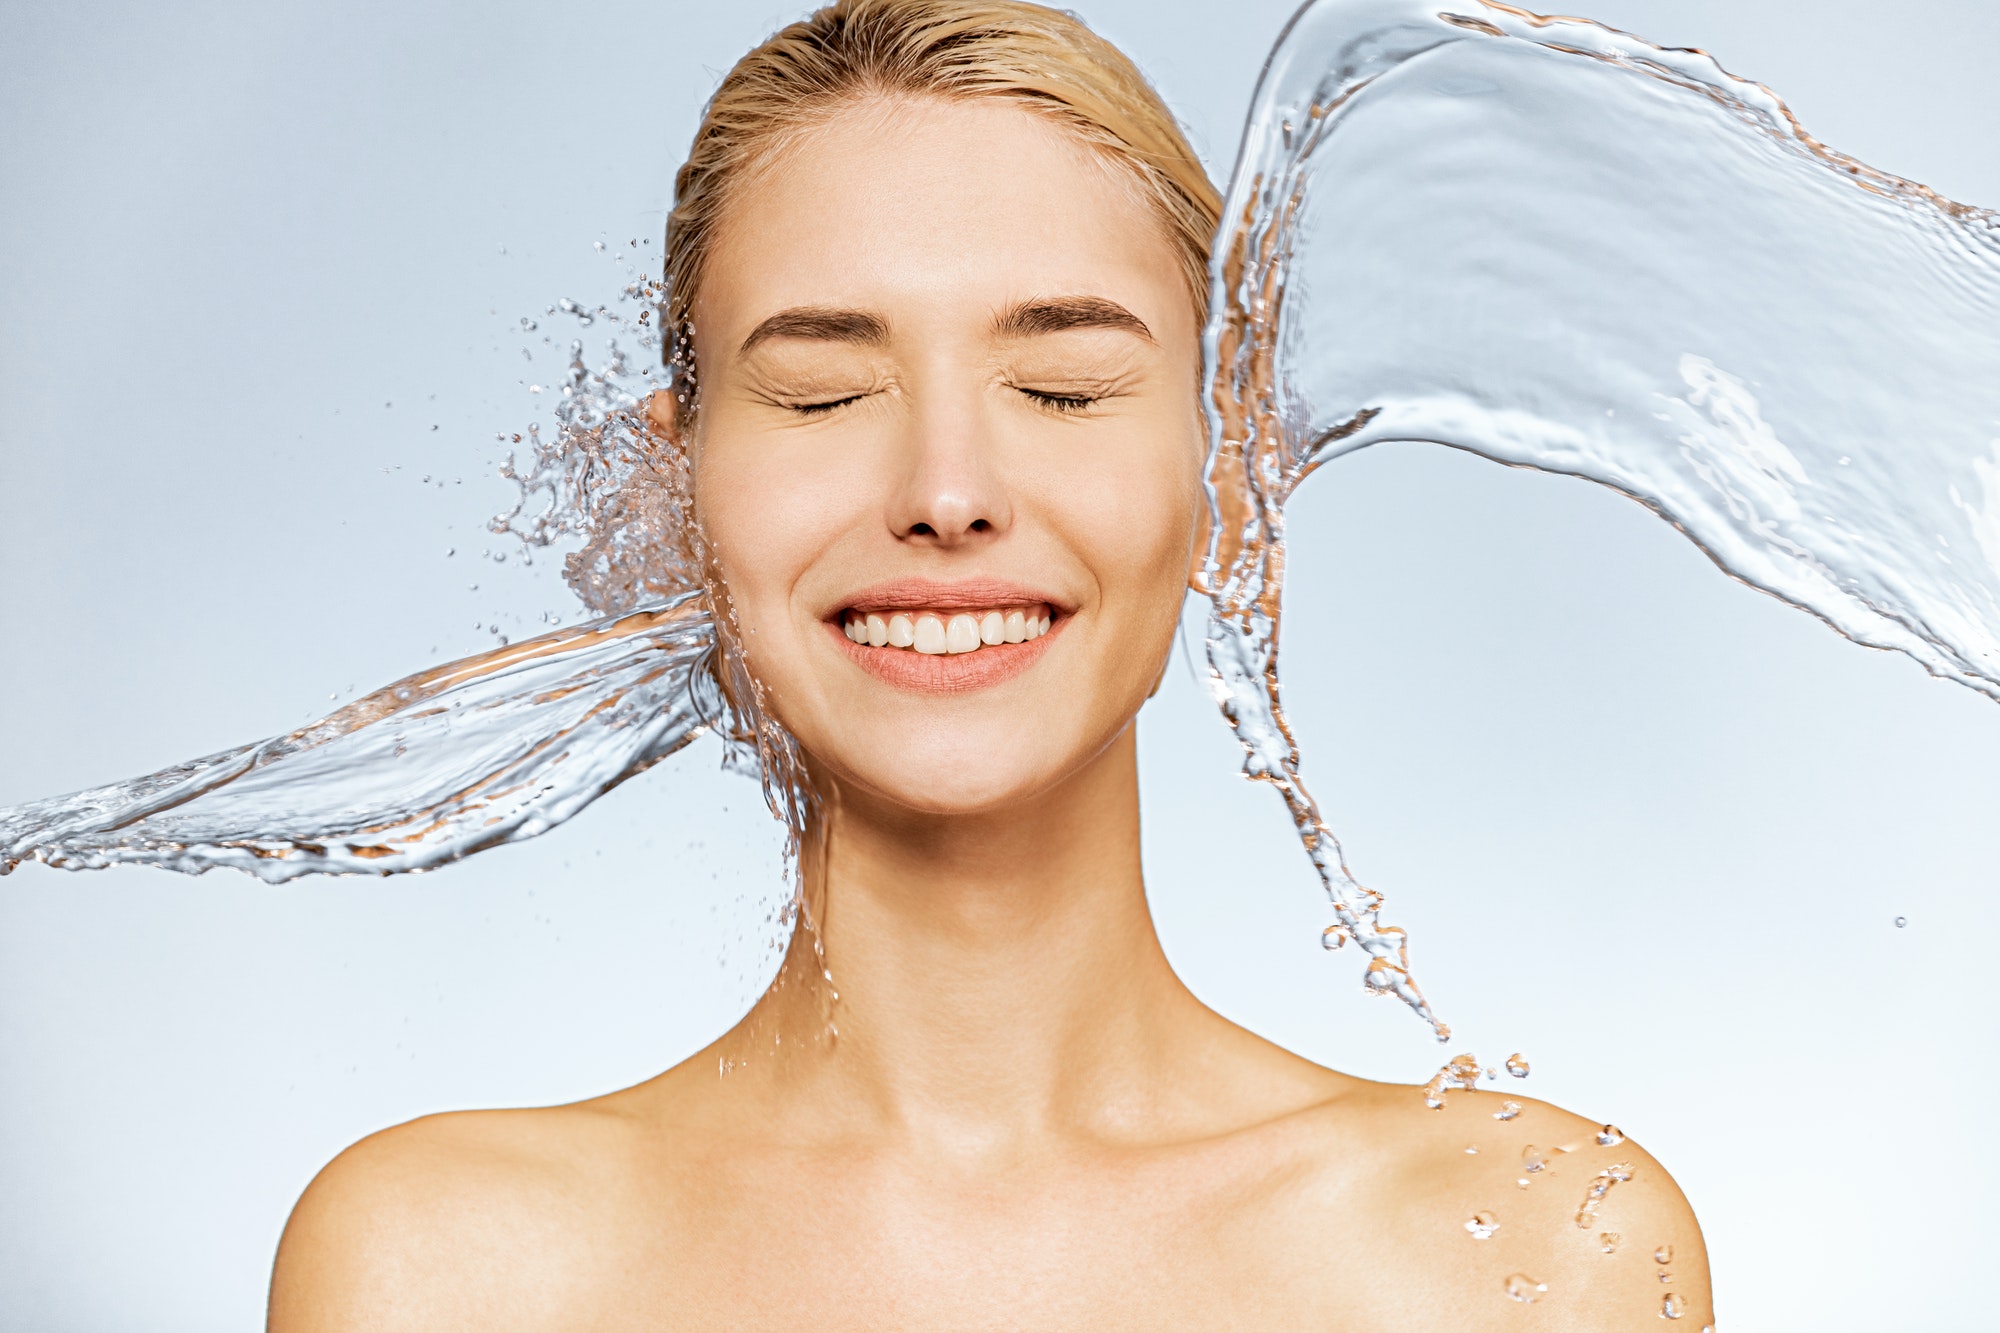 Photo of young woman with clean skin and splash of water.